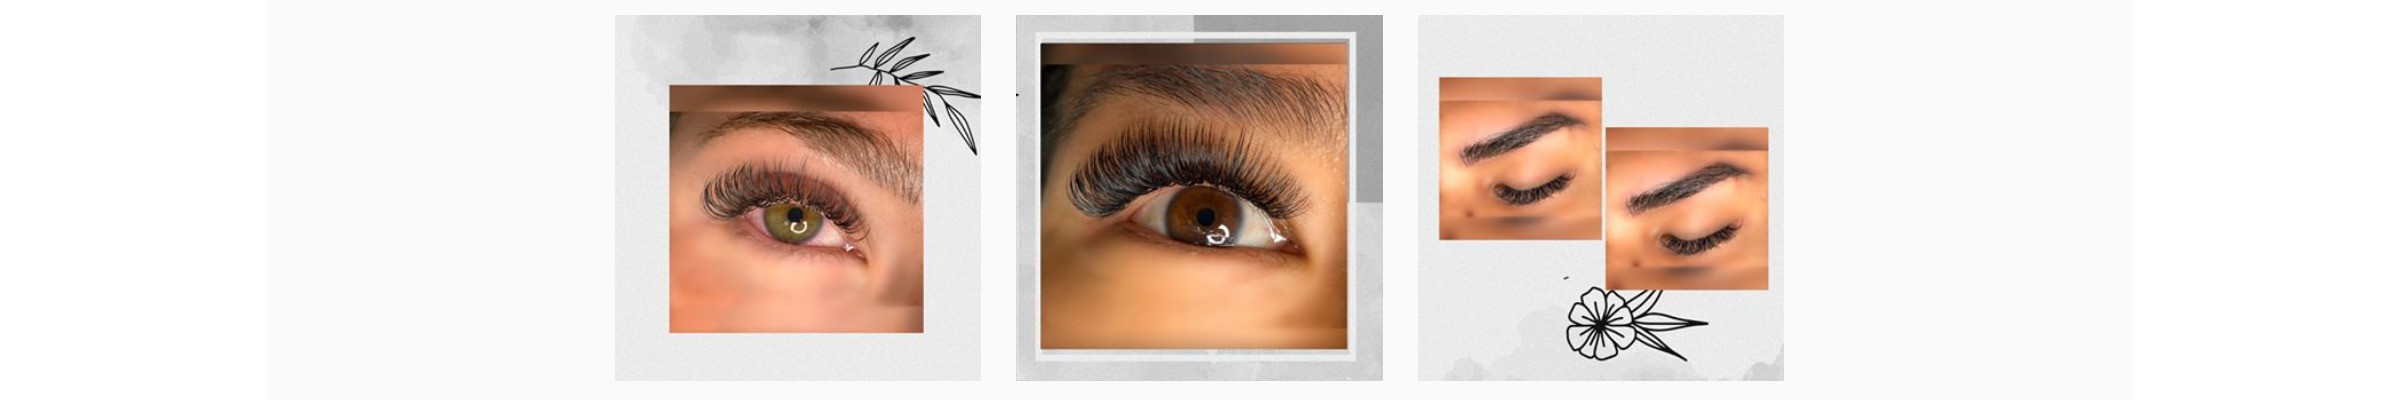 Brows and lashes services in Marbella